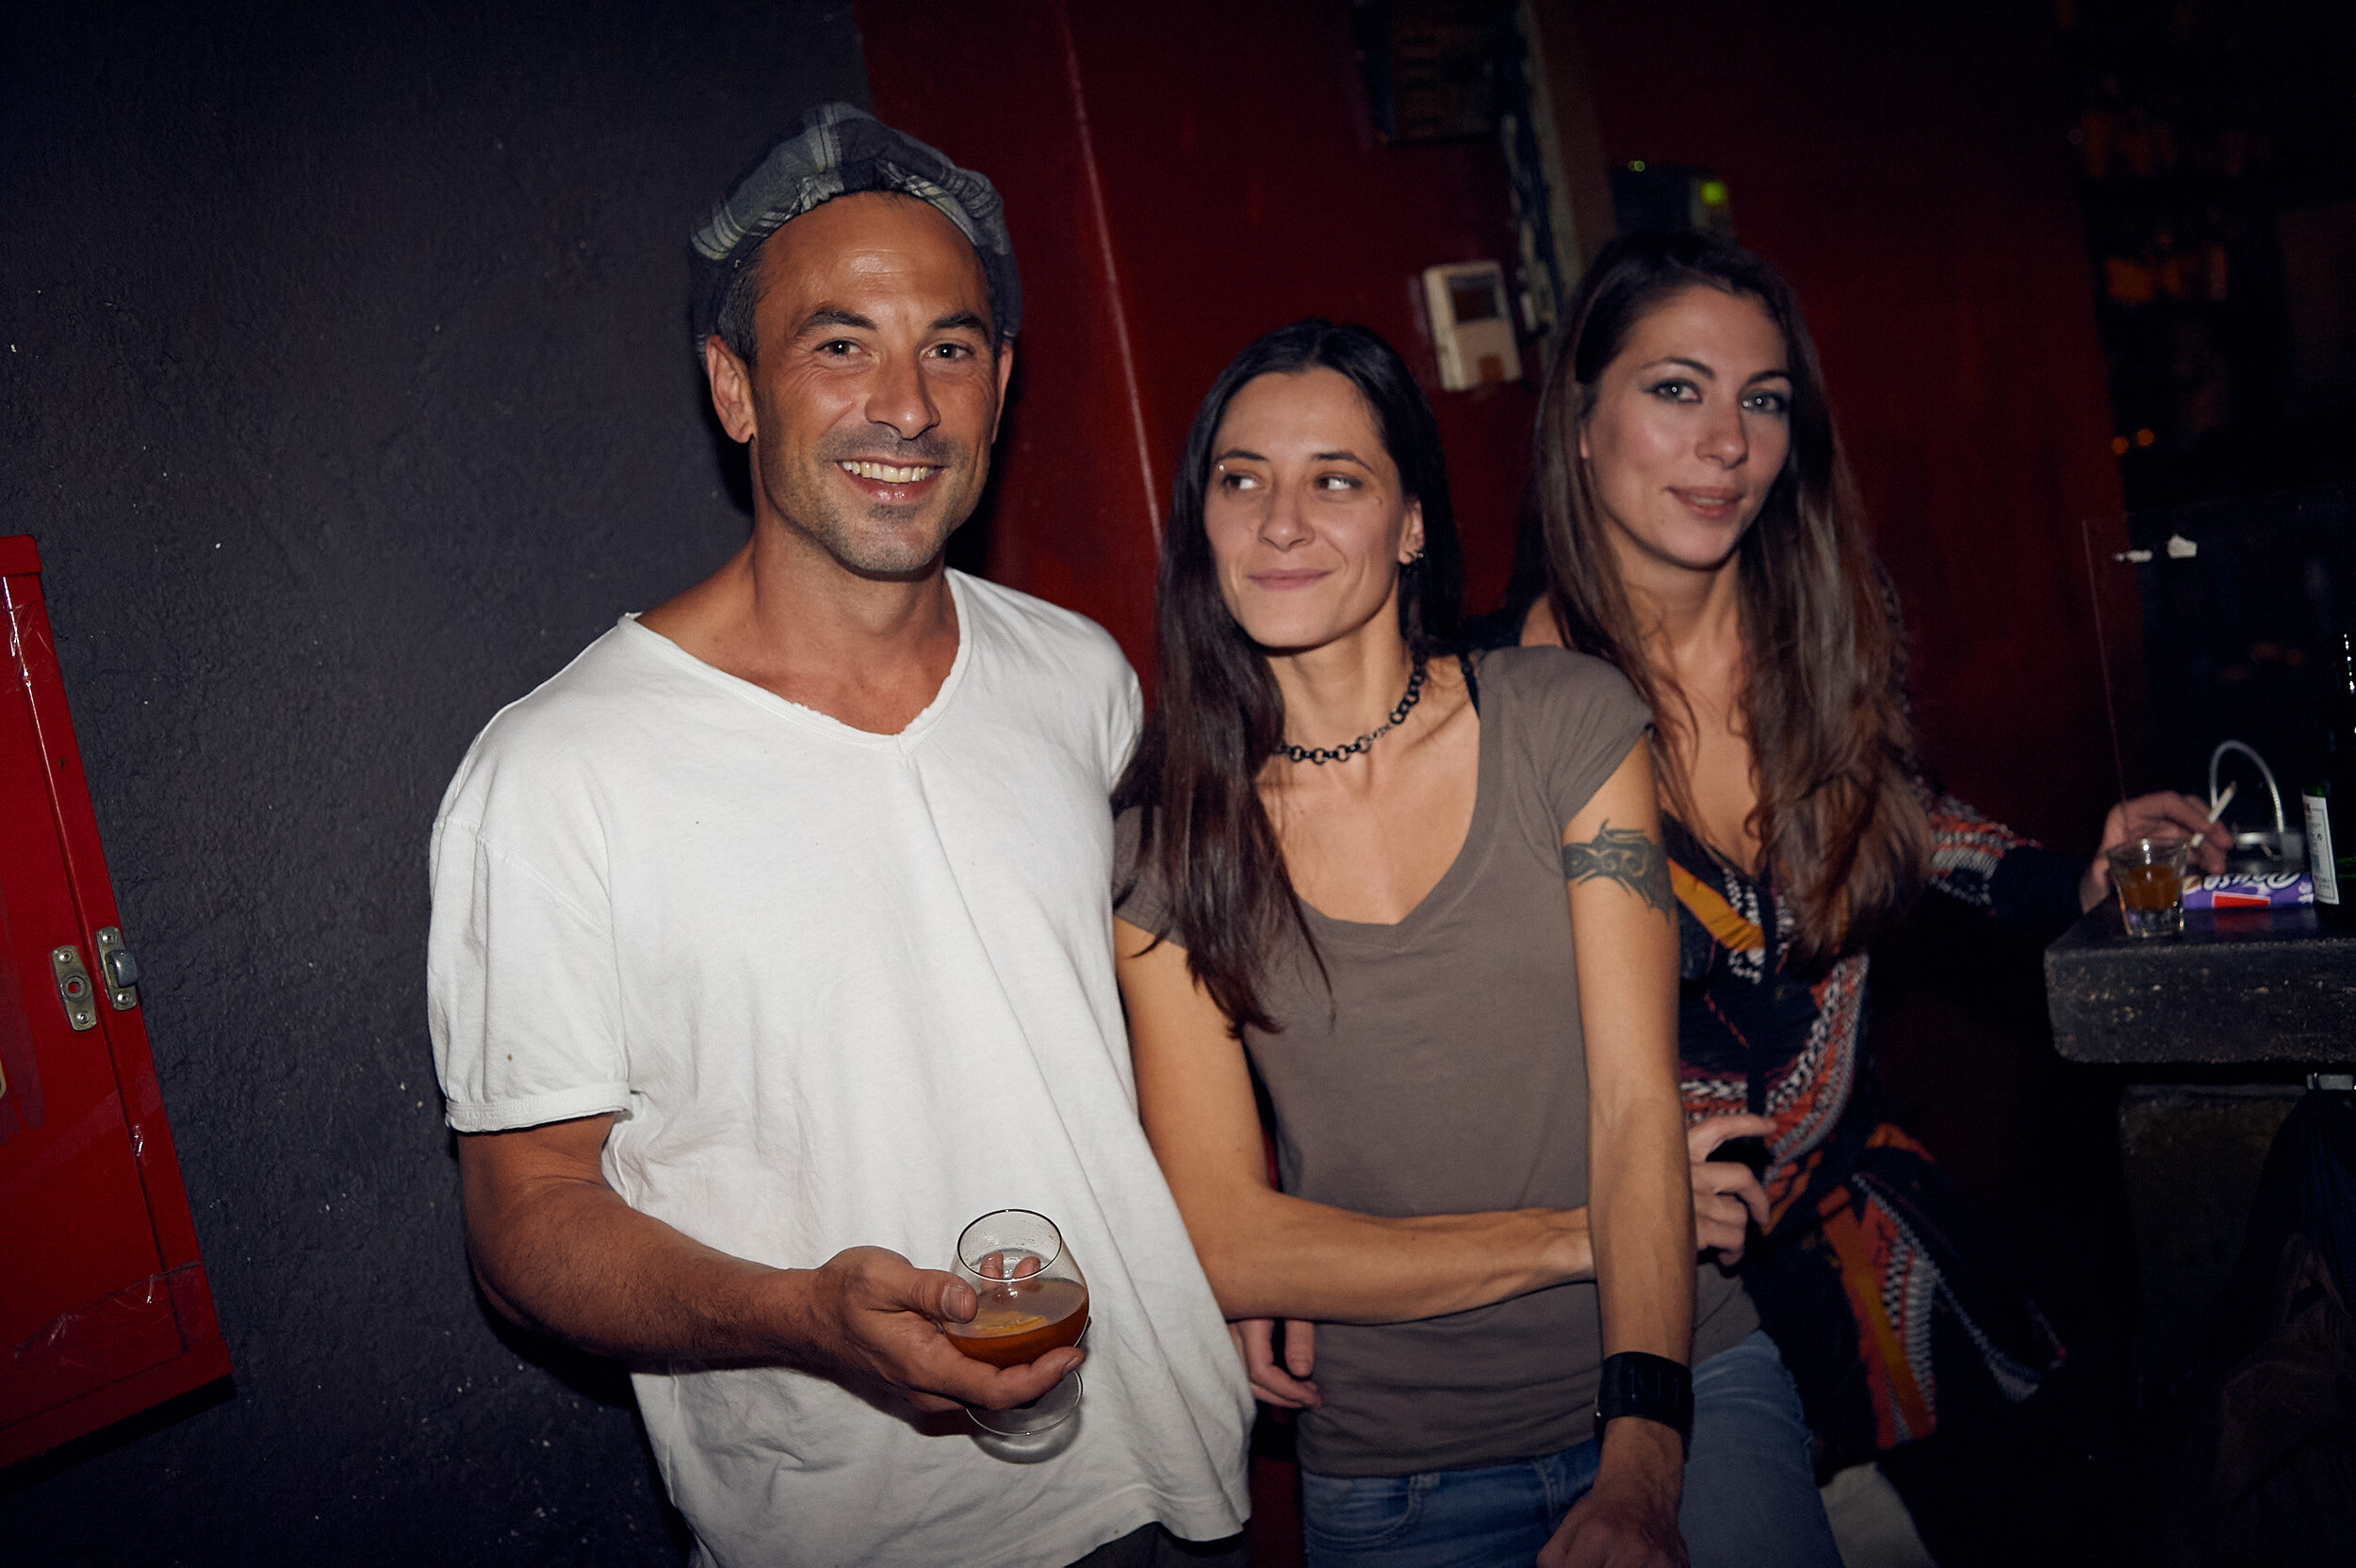  Nikolas Vrontissis (left), owner of the Hoxton bar in Gazi district, along with Katerina and Elena, djs at the bar. 